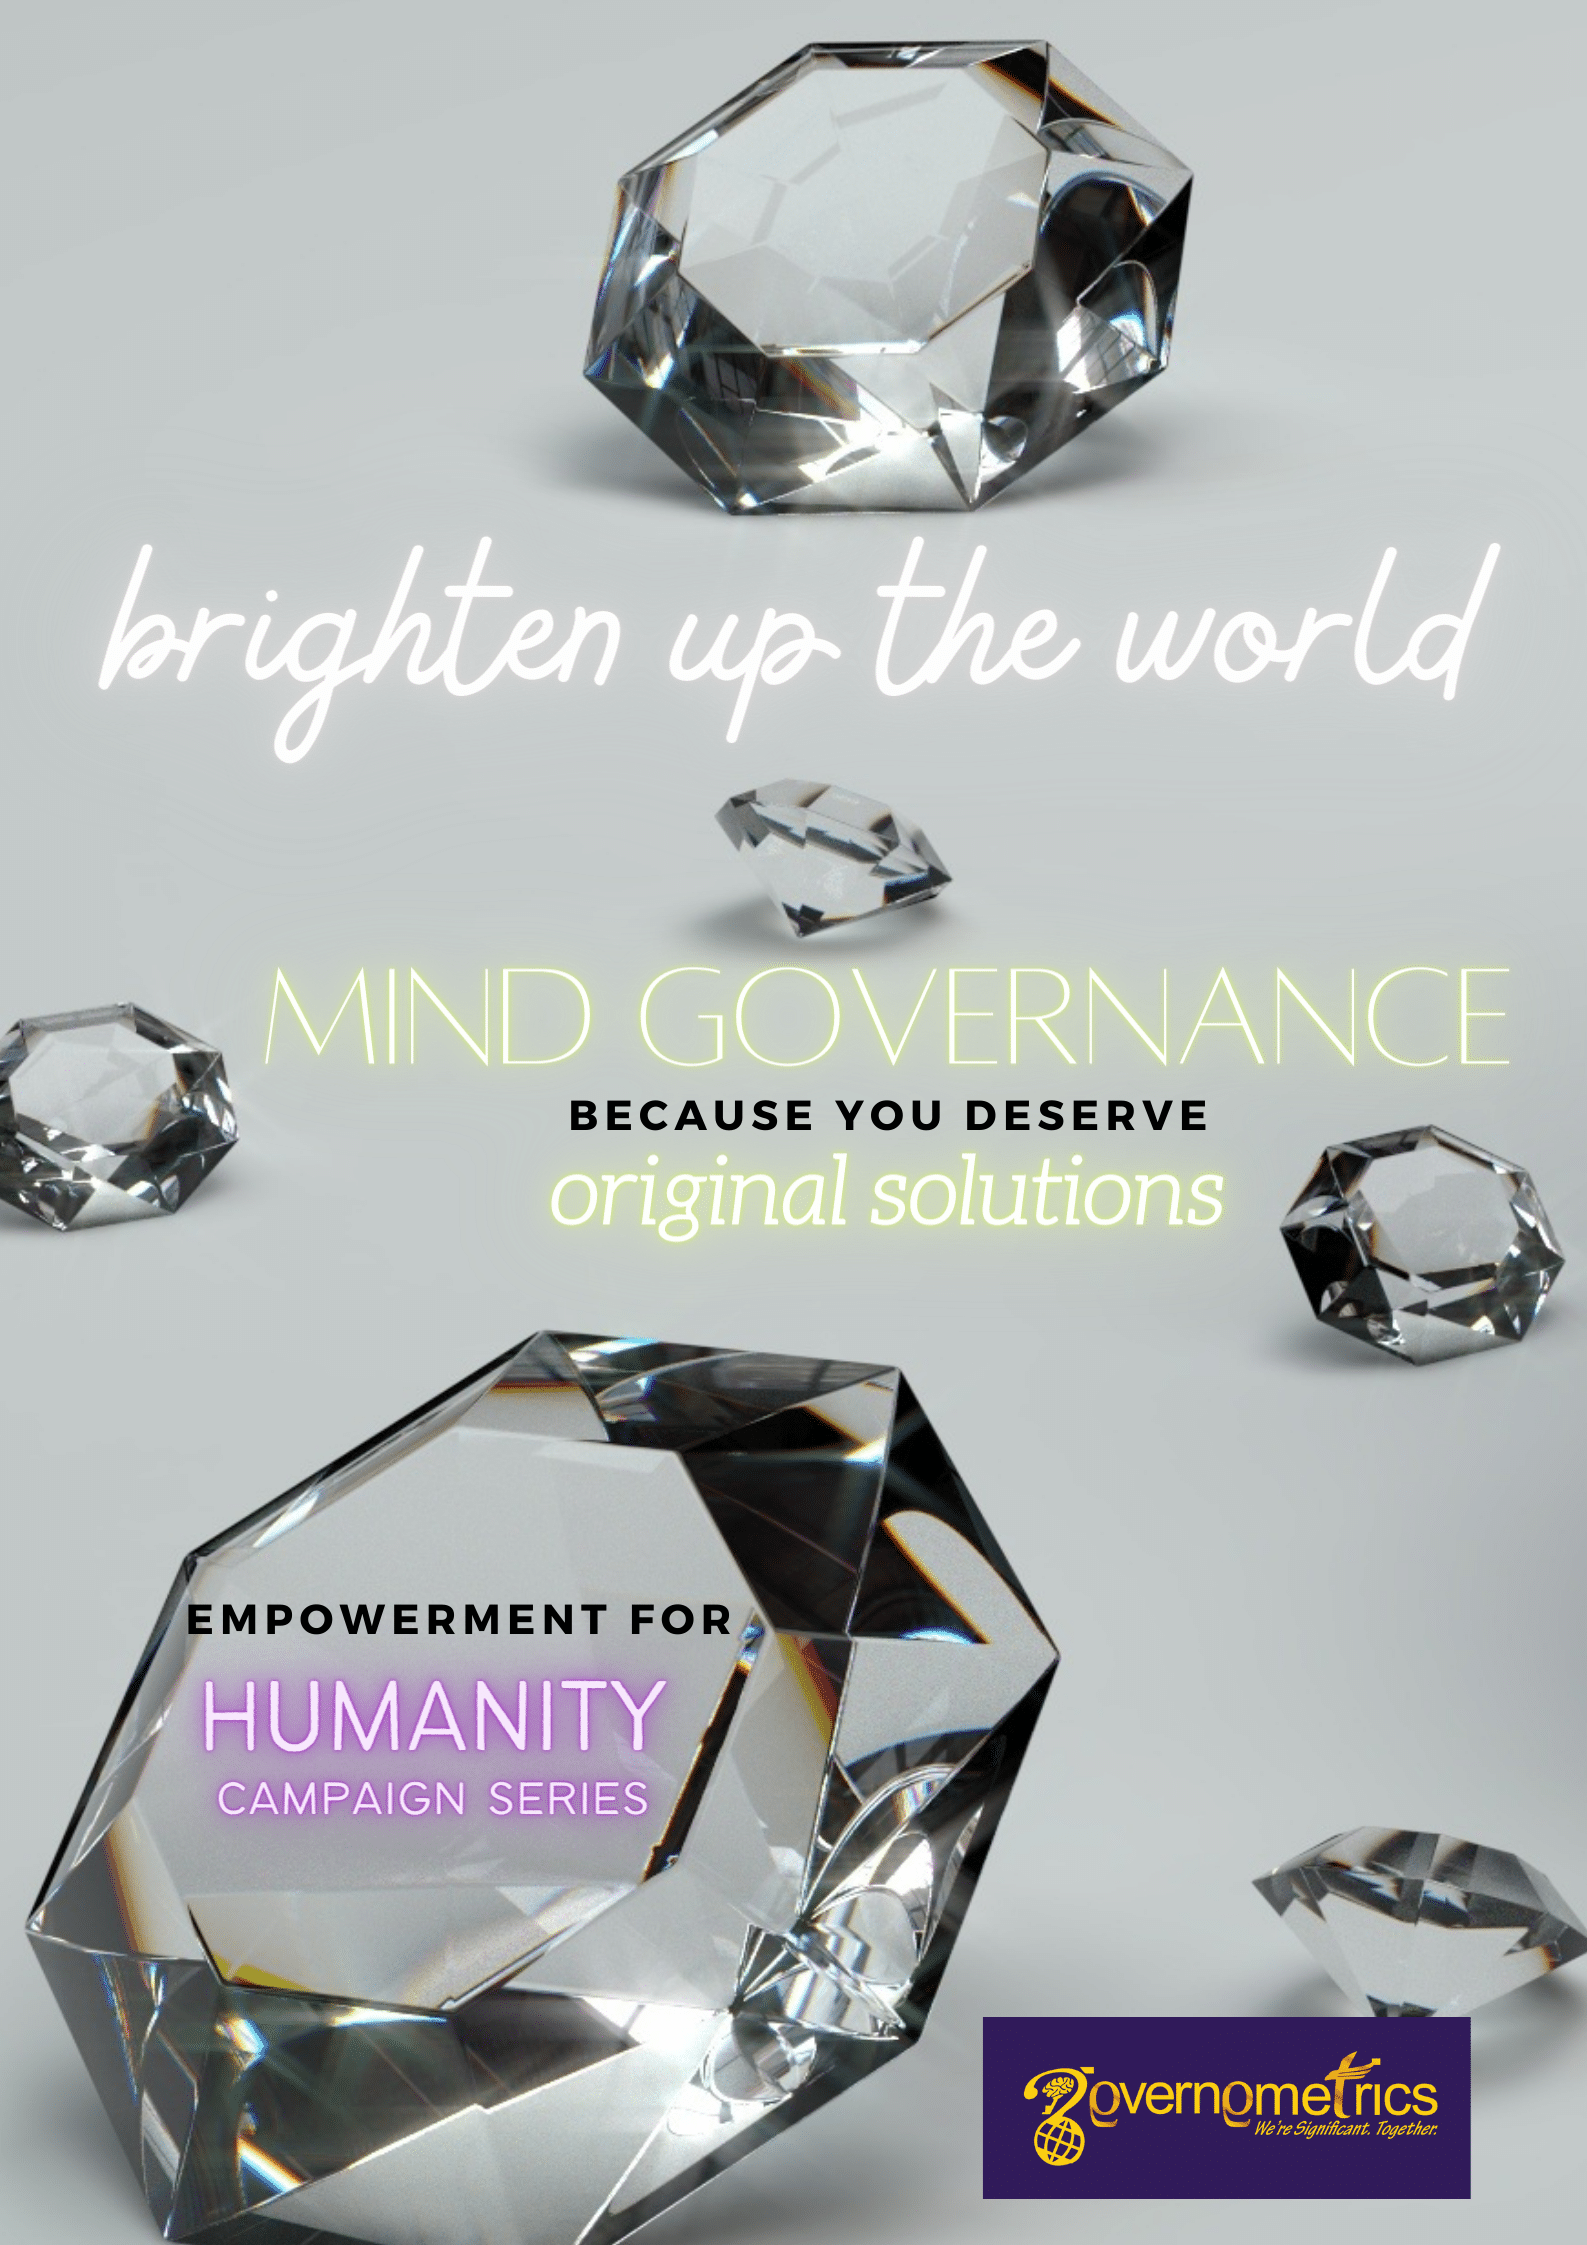 “Brighten Up the World” Officially Launched as Humanity Campaign Theme